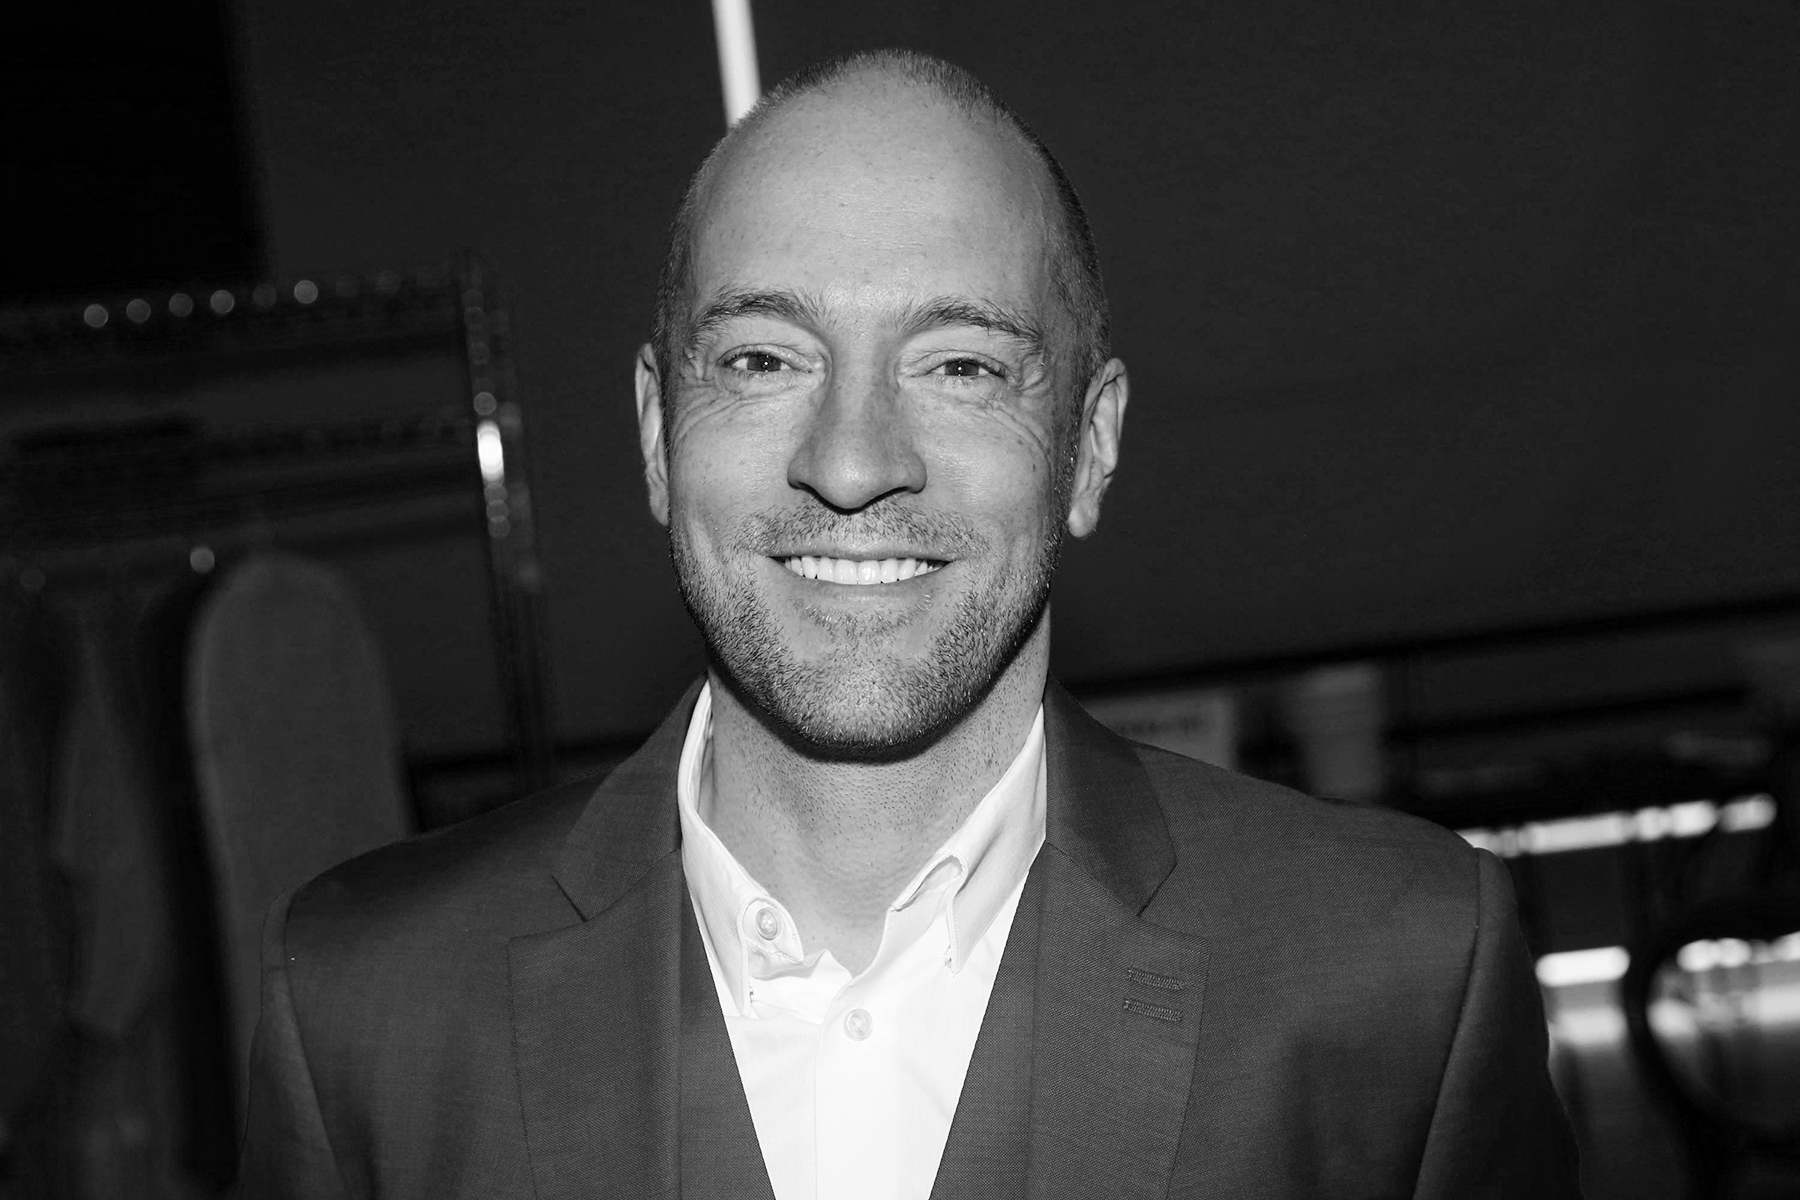 A black and white photo of Derren Brown's head and shoulders.